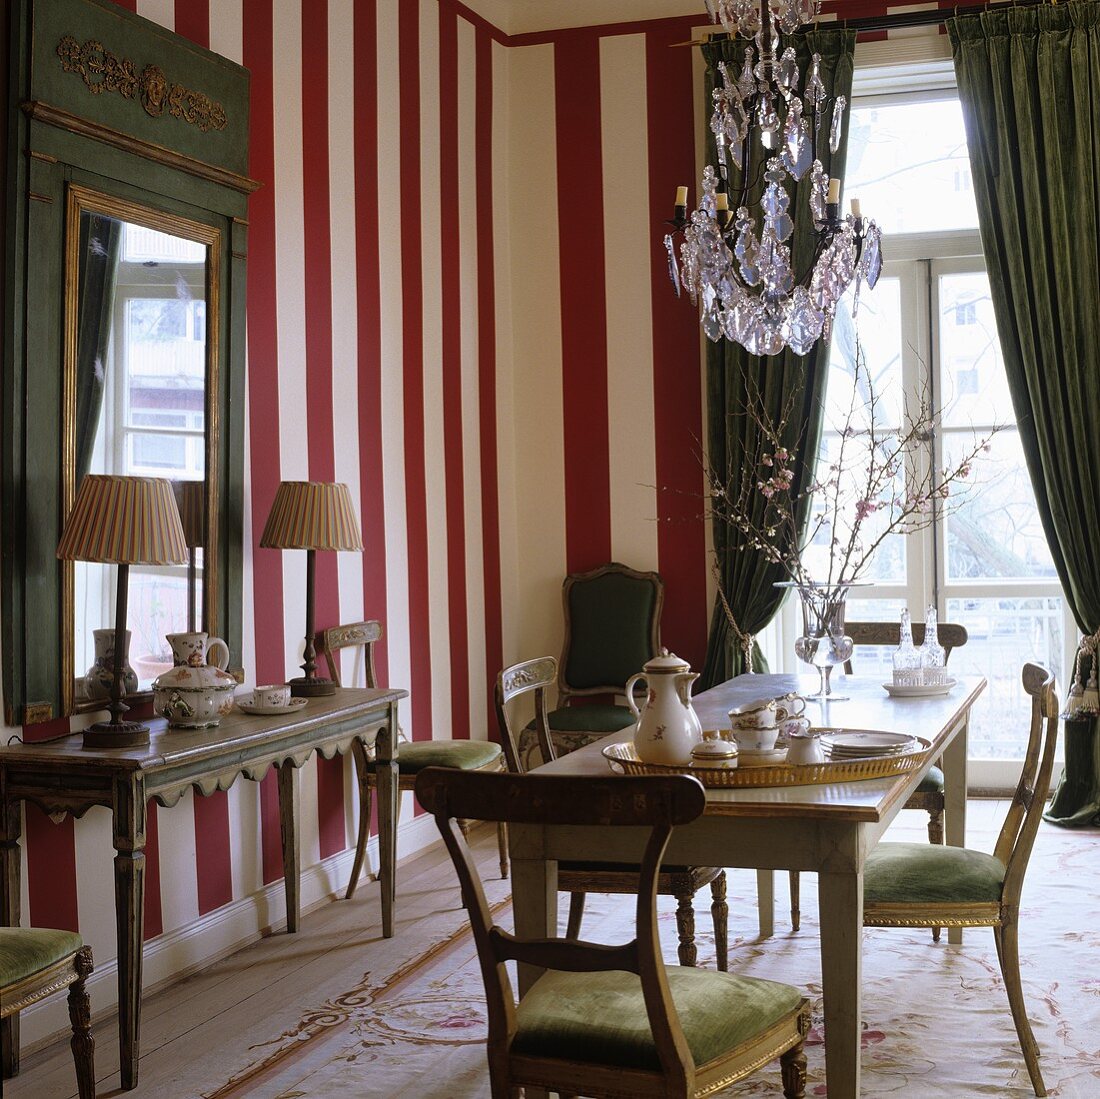 Coffee break in a dining room with a red and white striped wall and green curtains on a balcony door